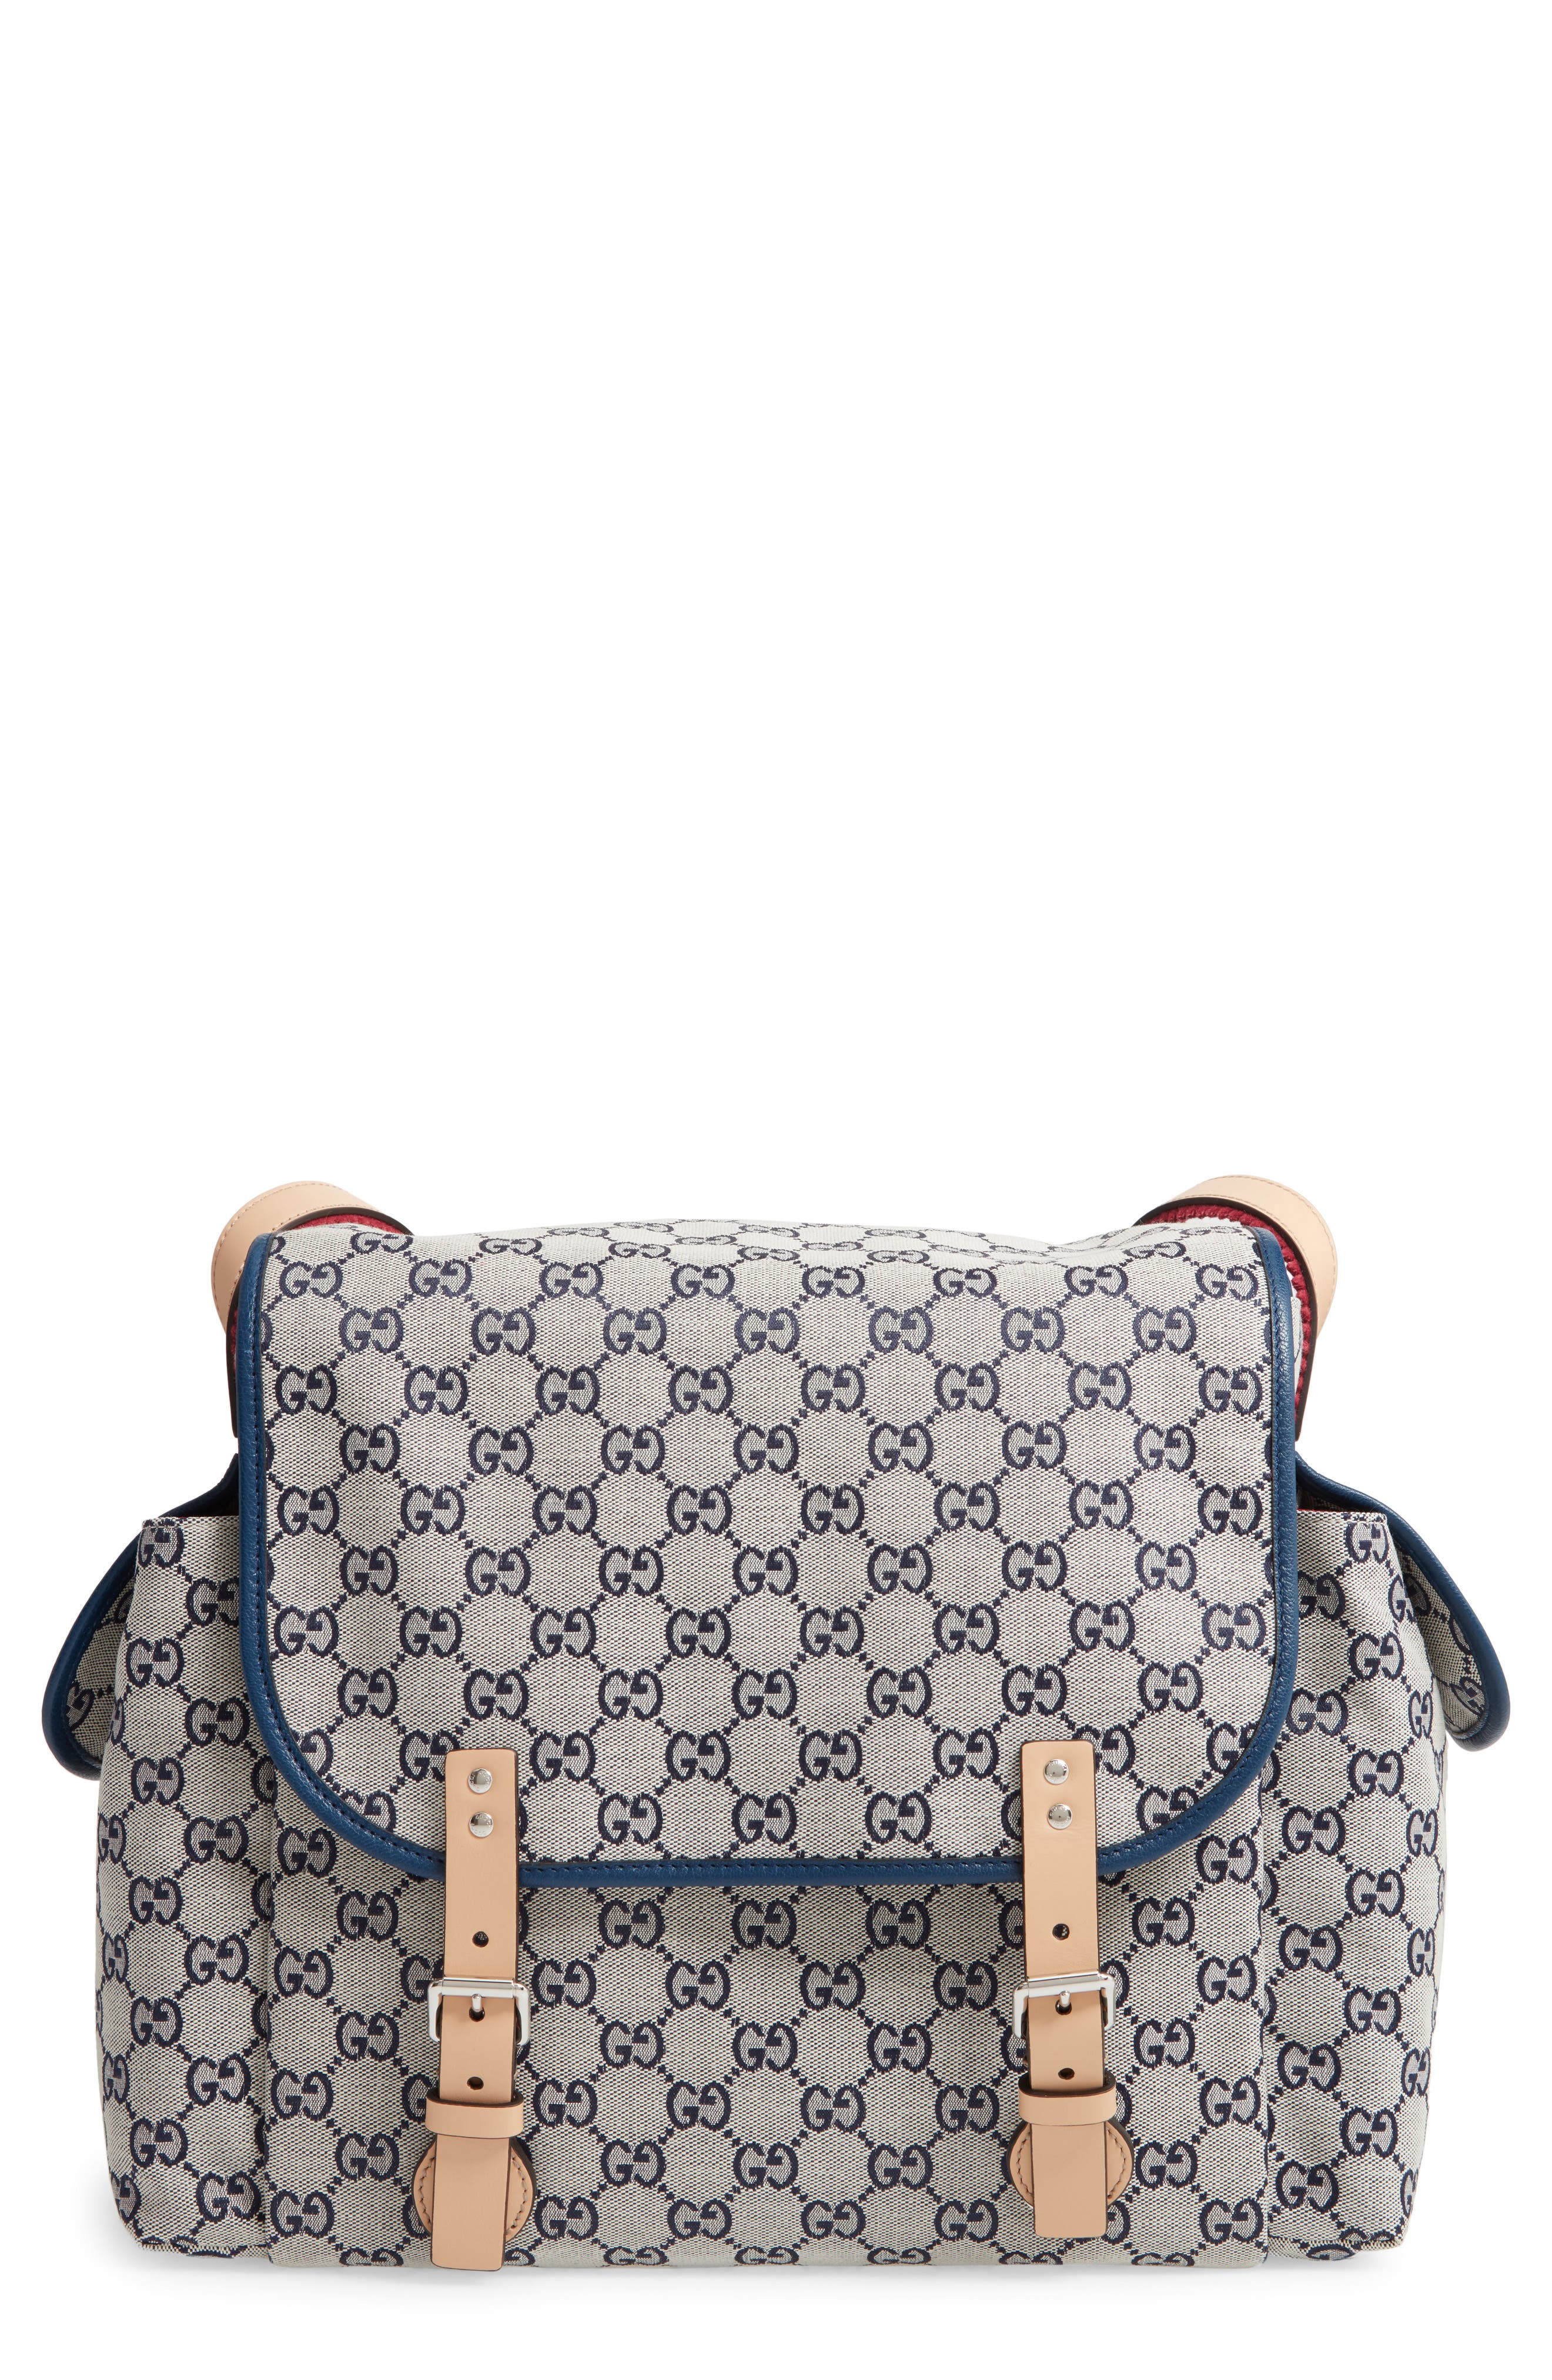 how much is a gucci diaper bag